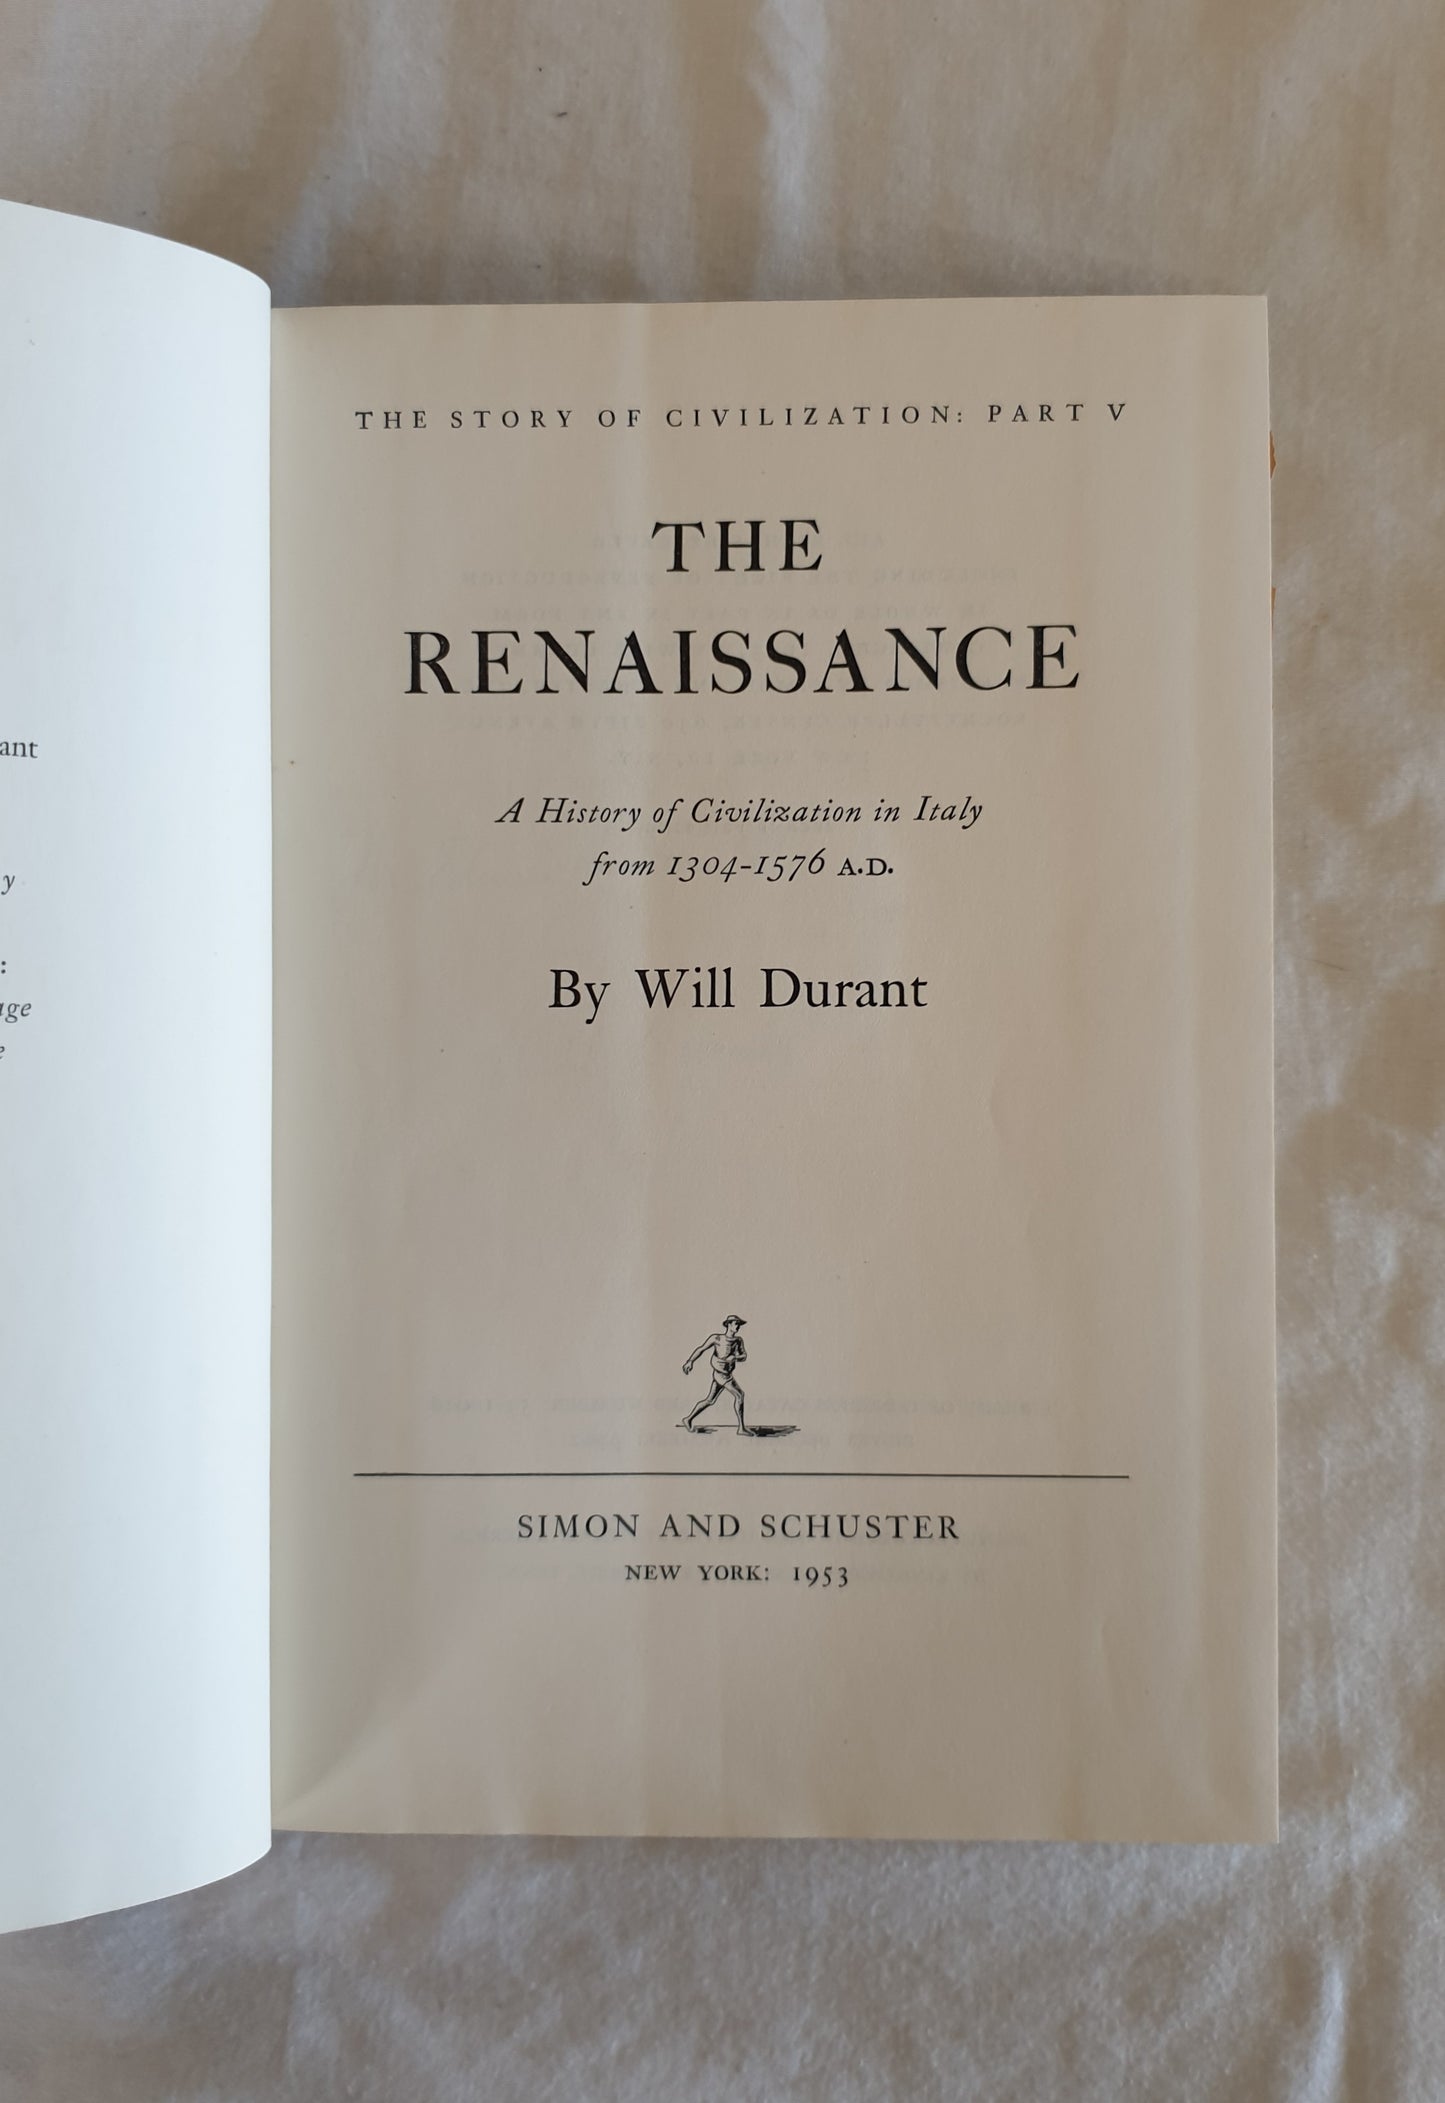 The Renaissance by Will Durant